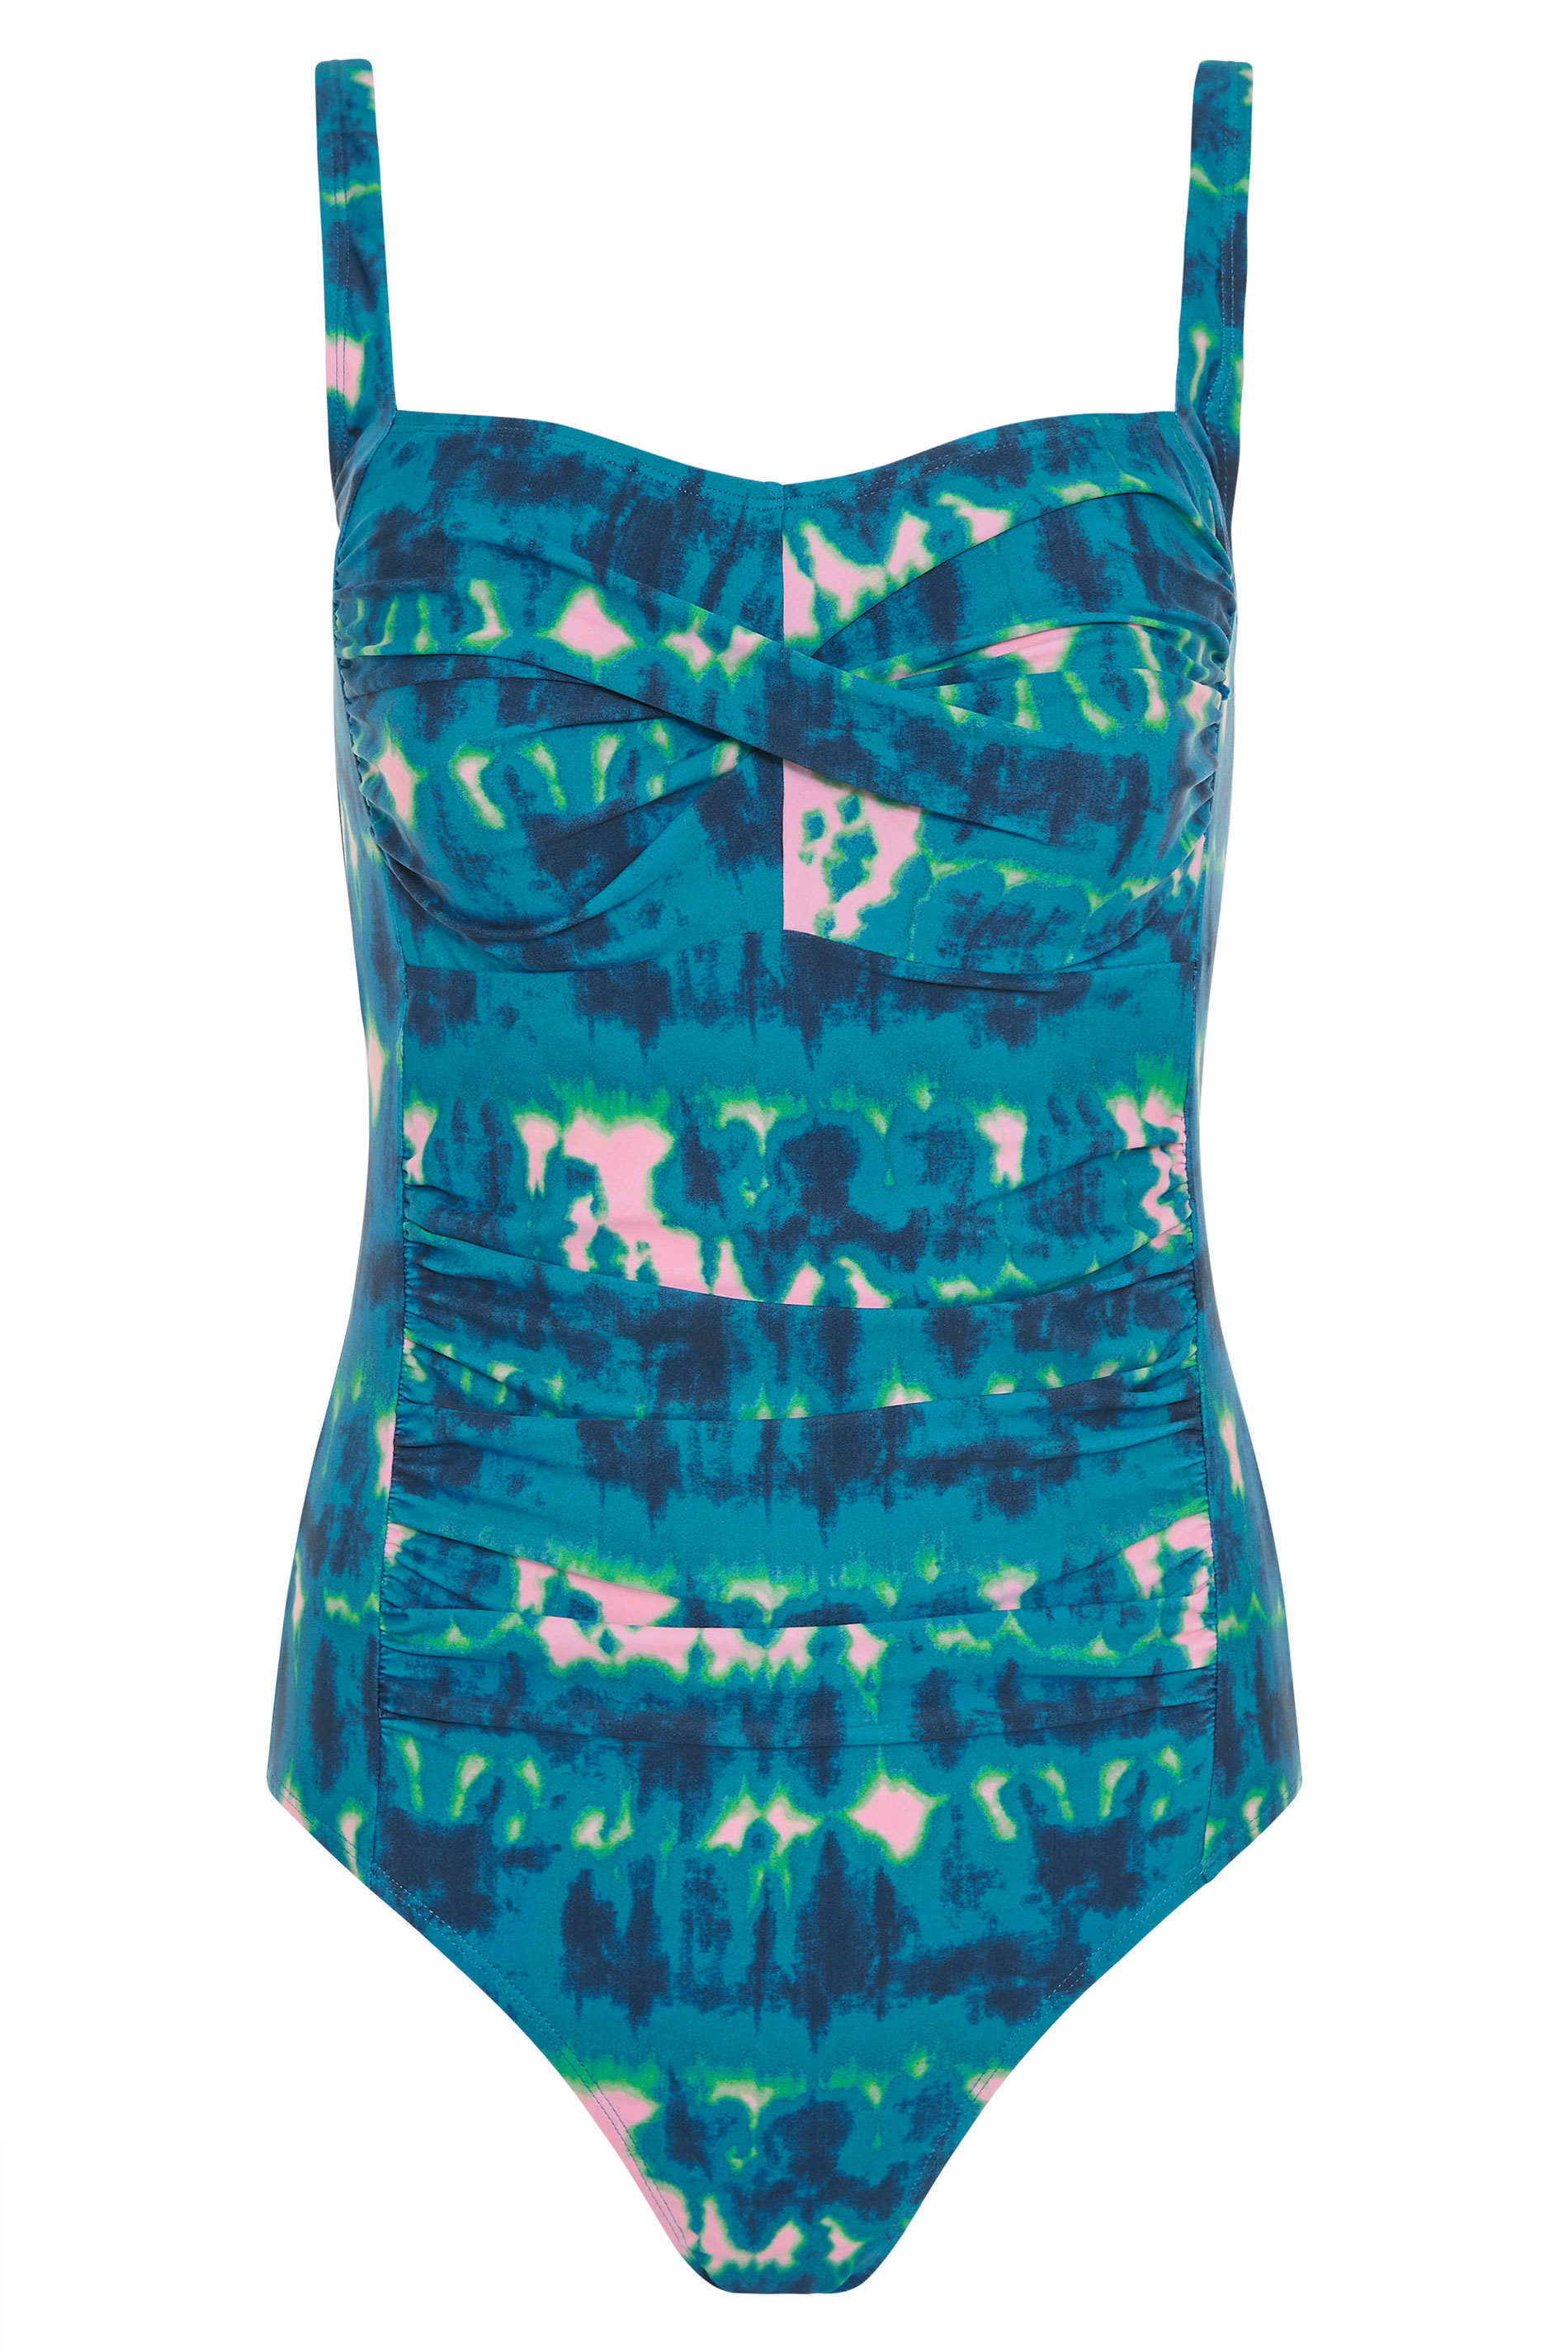 LTS Teal Blue Tie Dye Ruched Swimsuit | Long Tall Sally